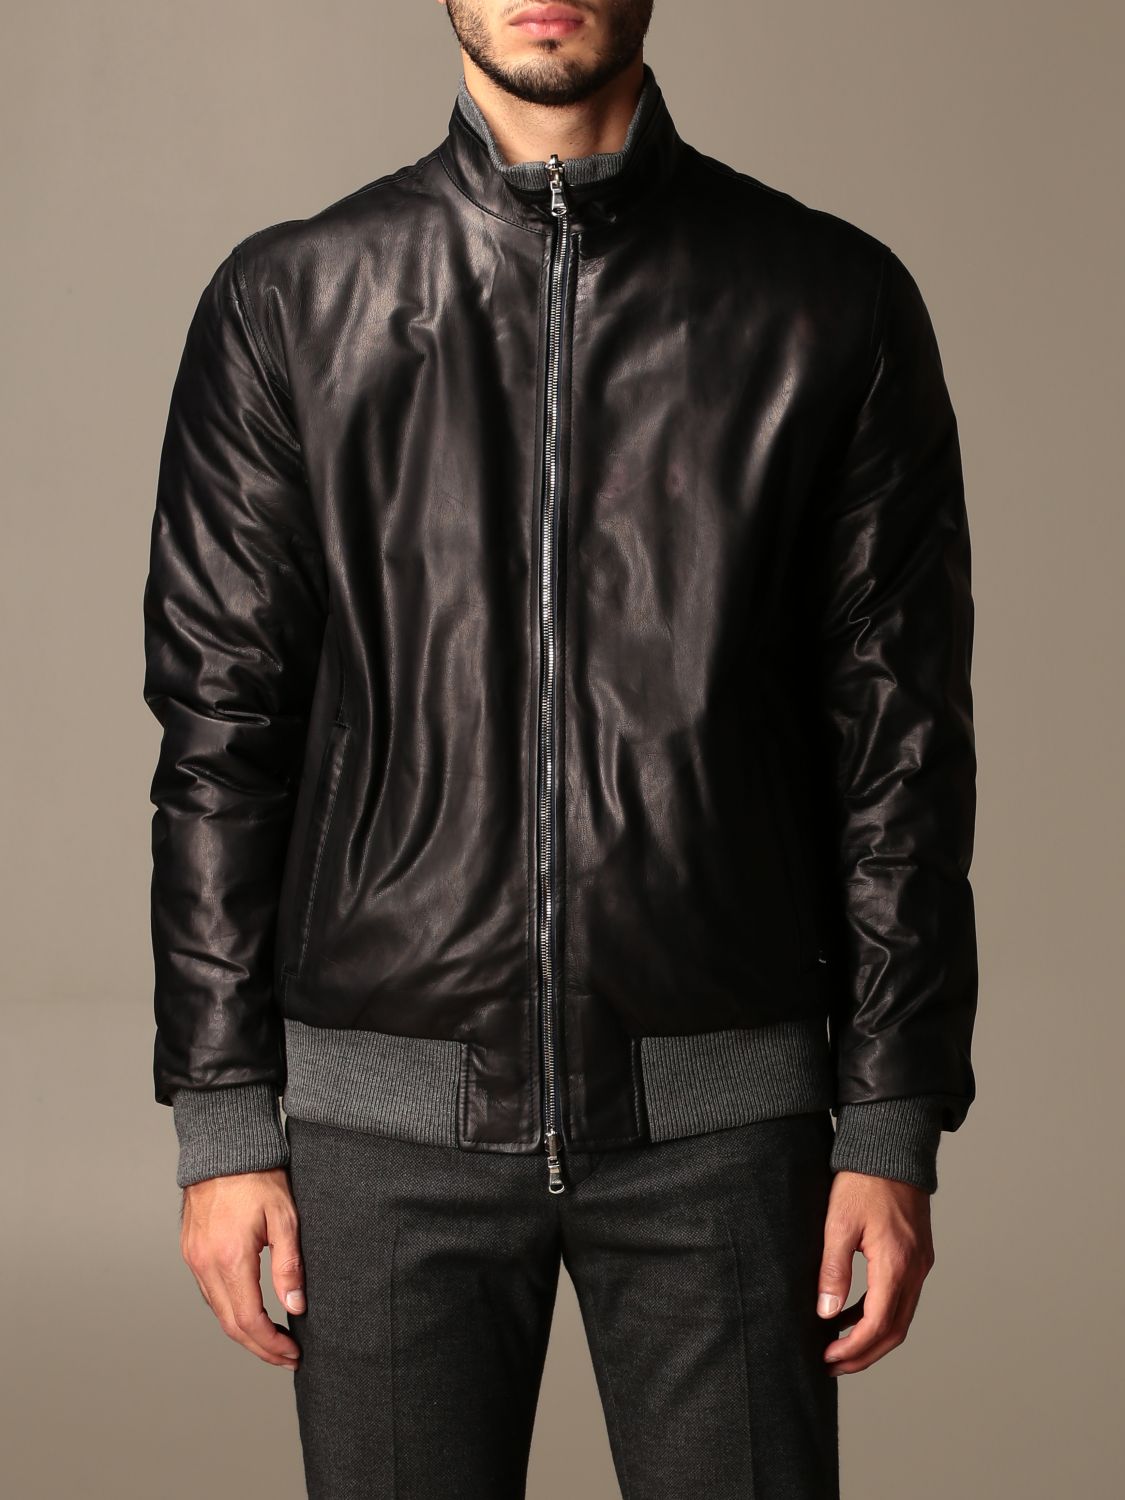 Barba Napoli Outlet: leather bomber jacket with zip - Blue | Barba ...